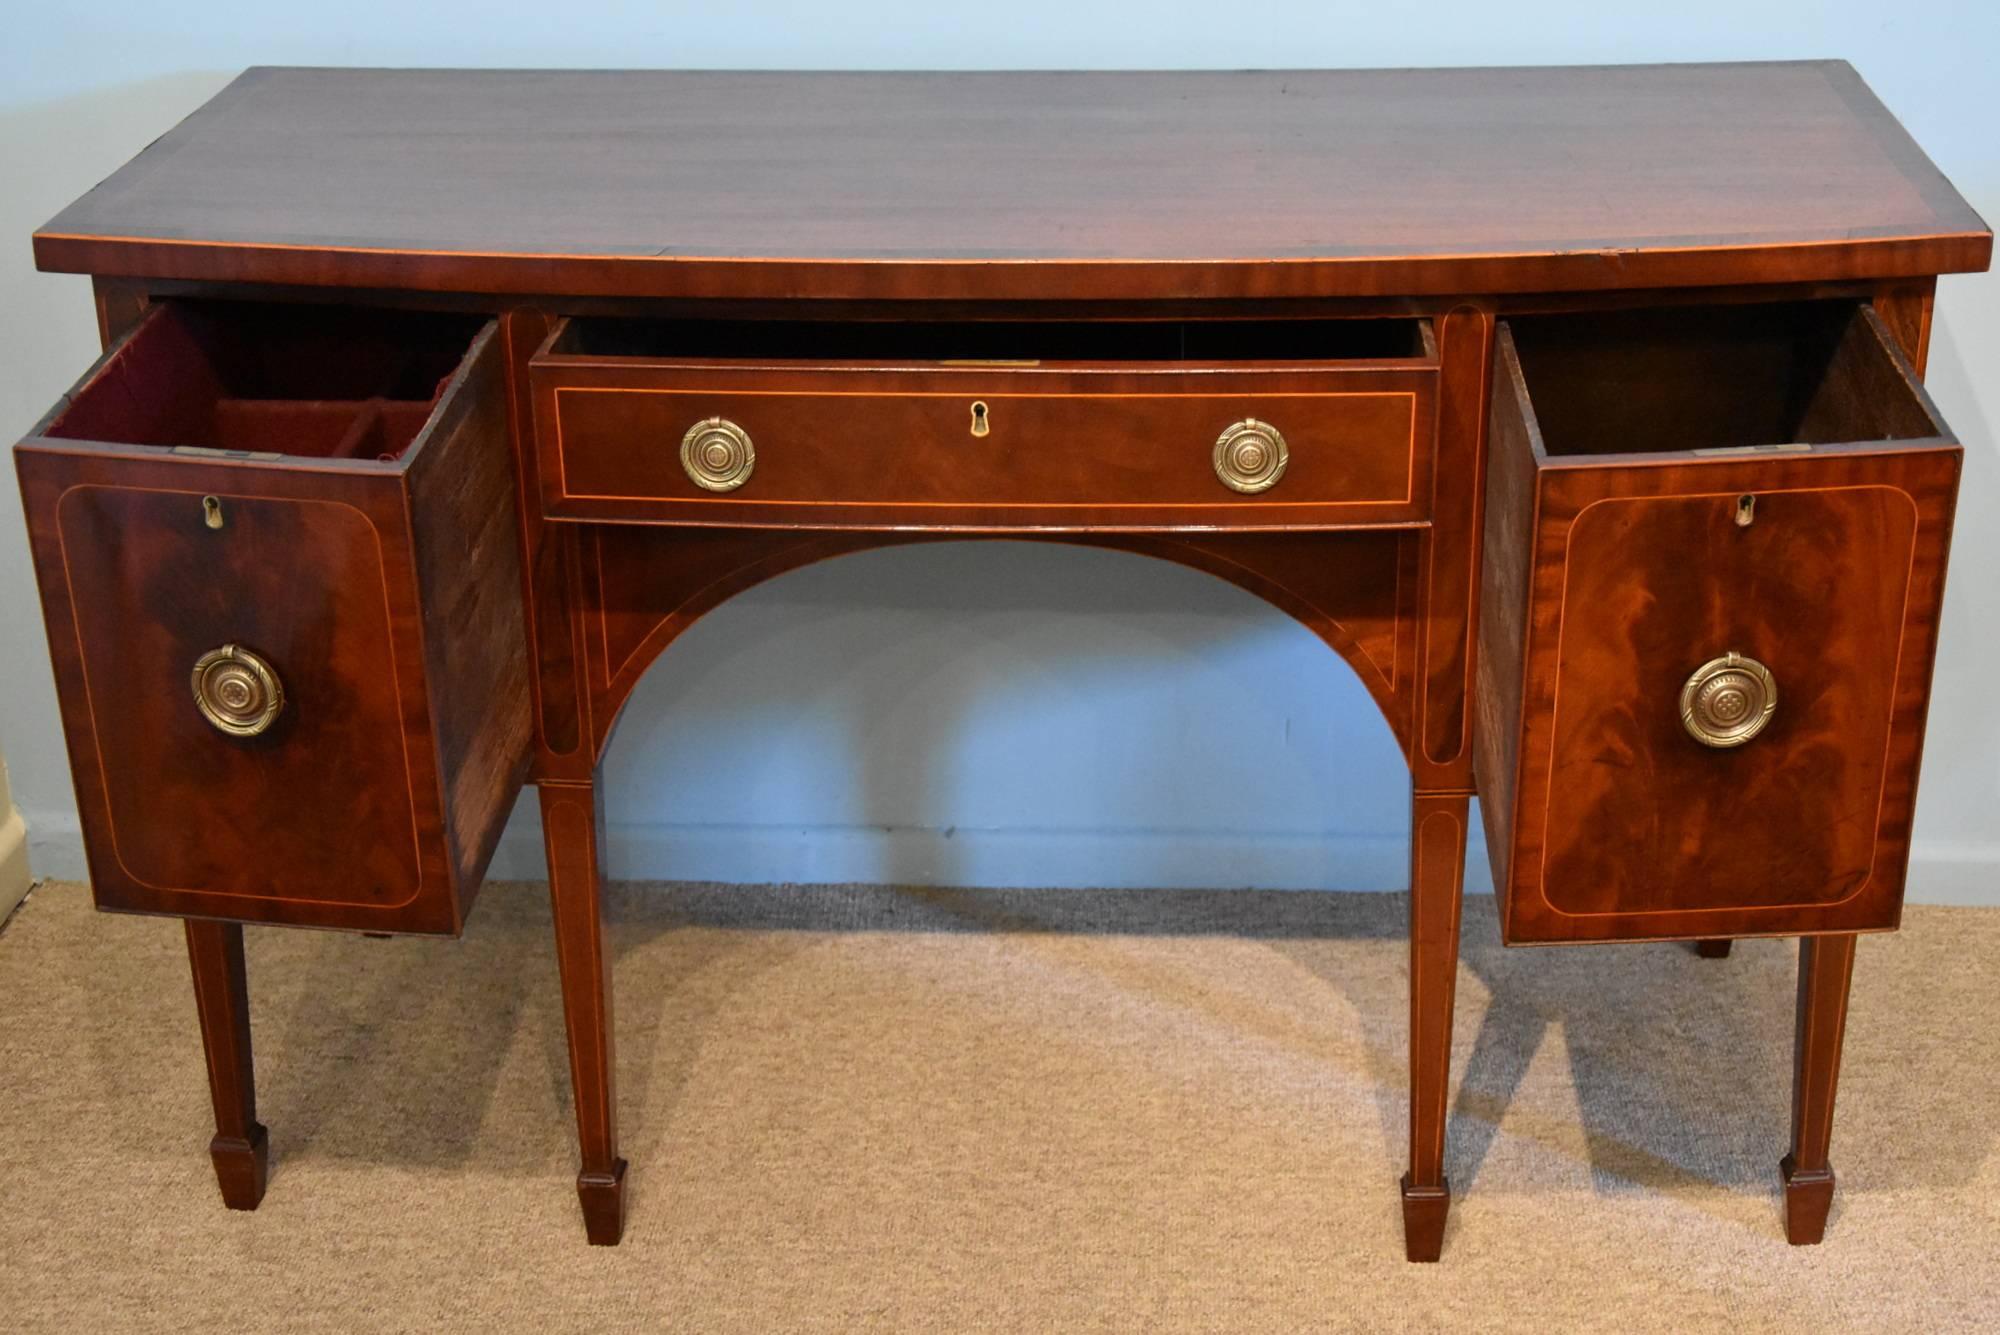 An elegant George III mahogany bow fronted sideboard, cross banded with rosewood. The piece has original handles and cellerette drawer.

Dimensions:
Height 32.5